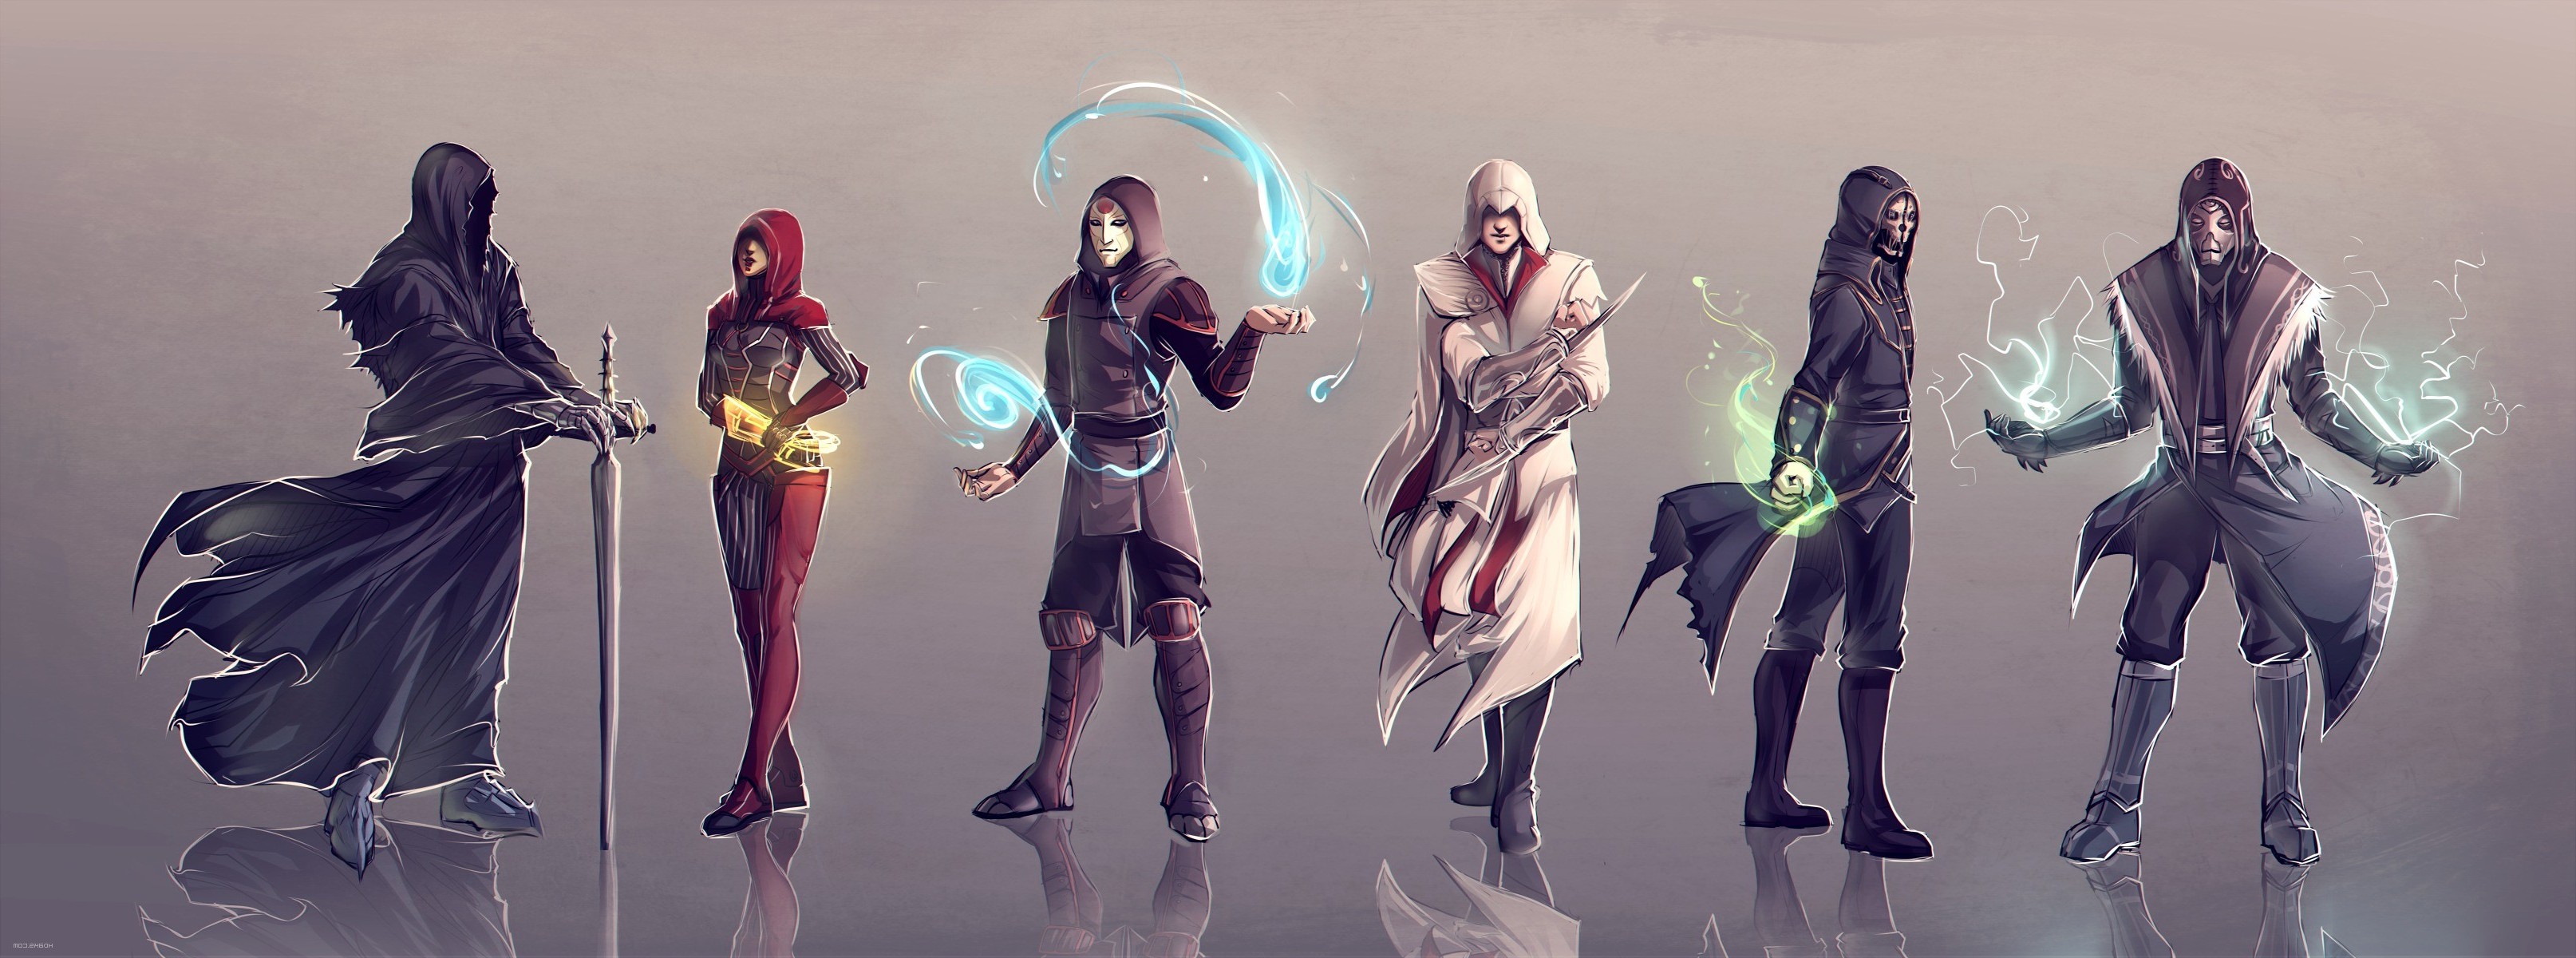 167103 Dishonored Assassins_Creed Mass_Effect The_Elder_Scrolls The_Legend_of_Korra The_Lord_of_the_Rings hoods Ezio_Auditore_da_Firenze Kasumi_Goto dragonborn